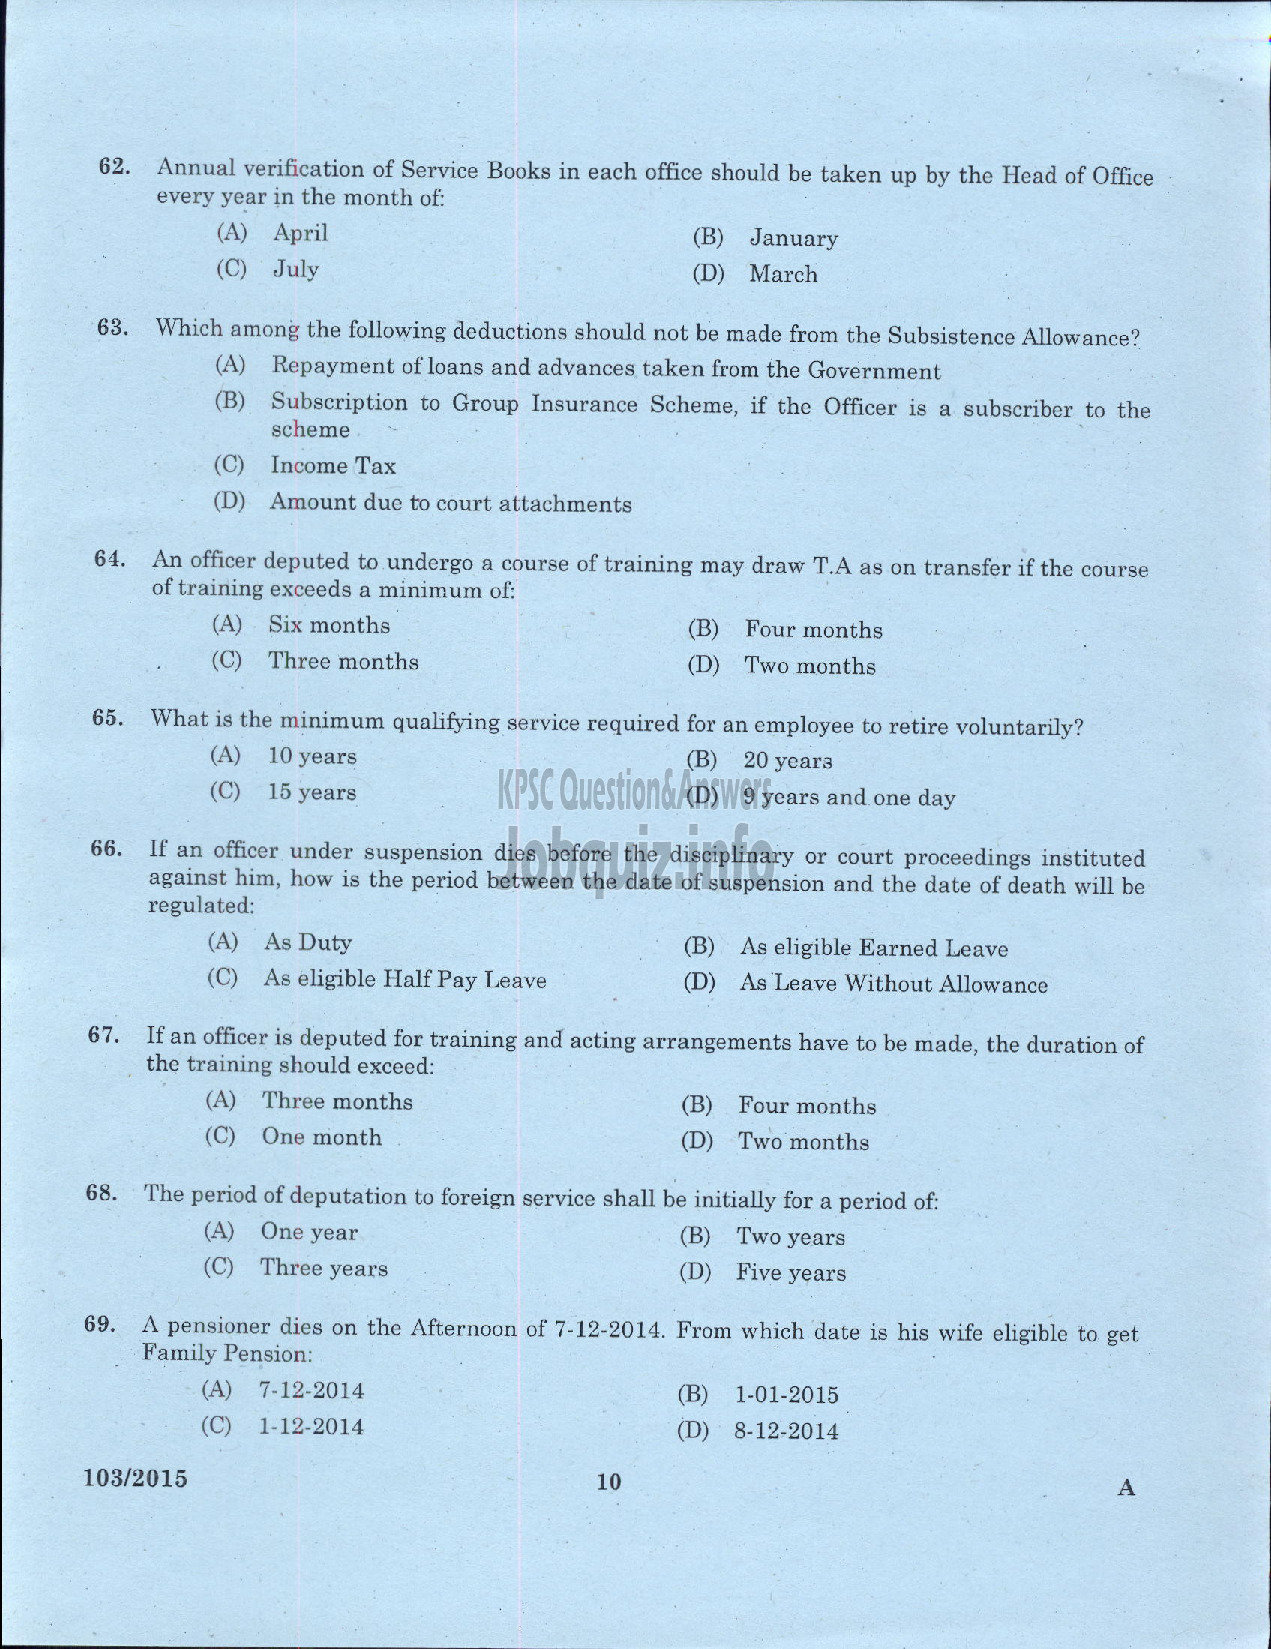 Kerala PSC Question Paper - ADMINISTRATIVE OFFICER BY TRANSFER INTERNAL KSRTC-8